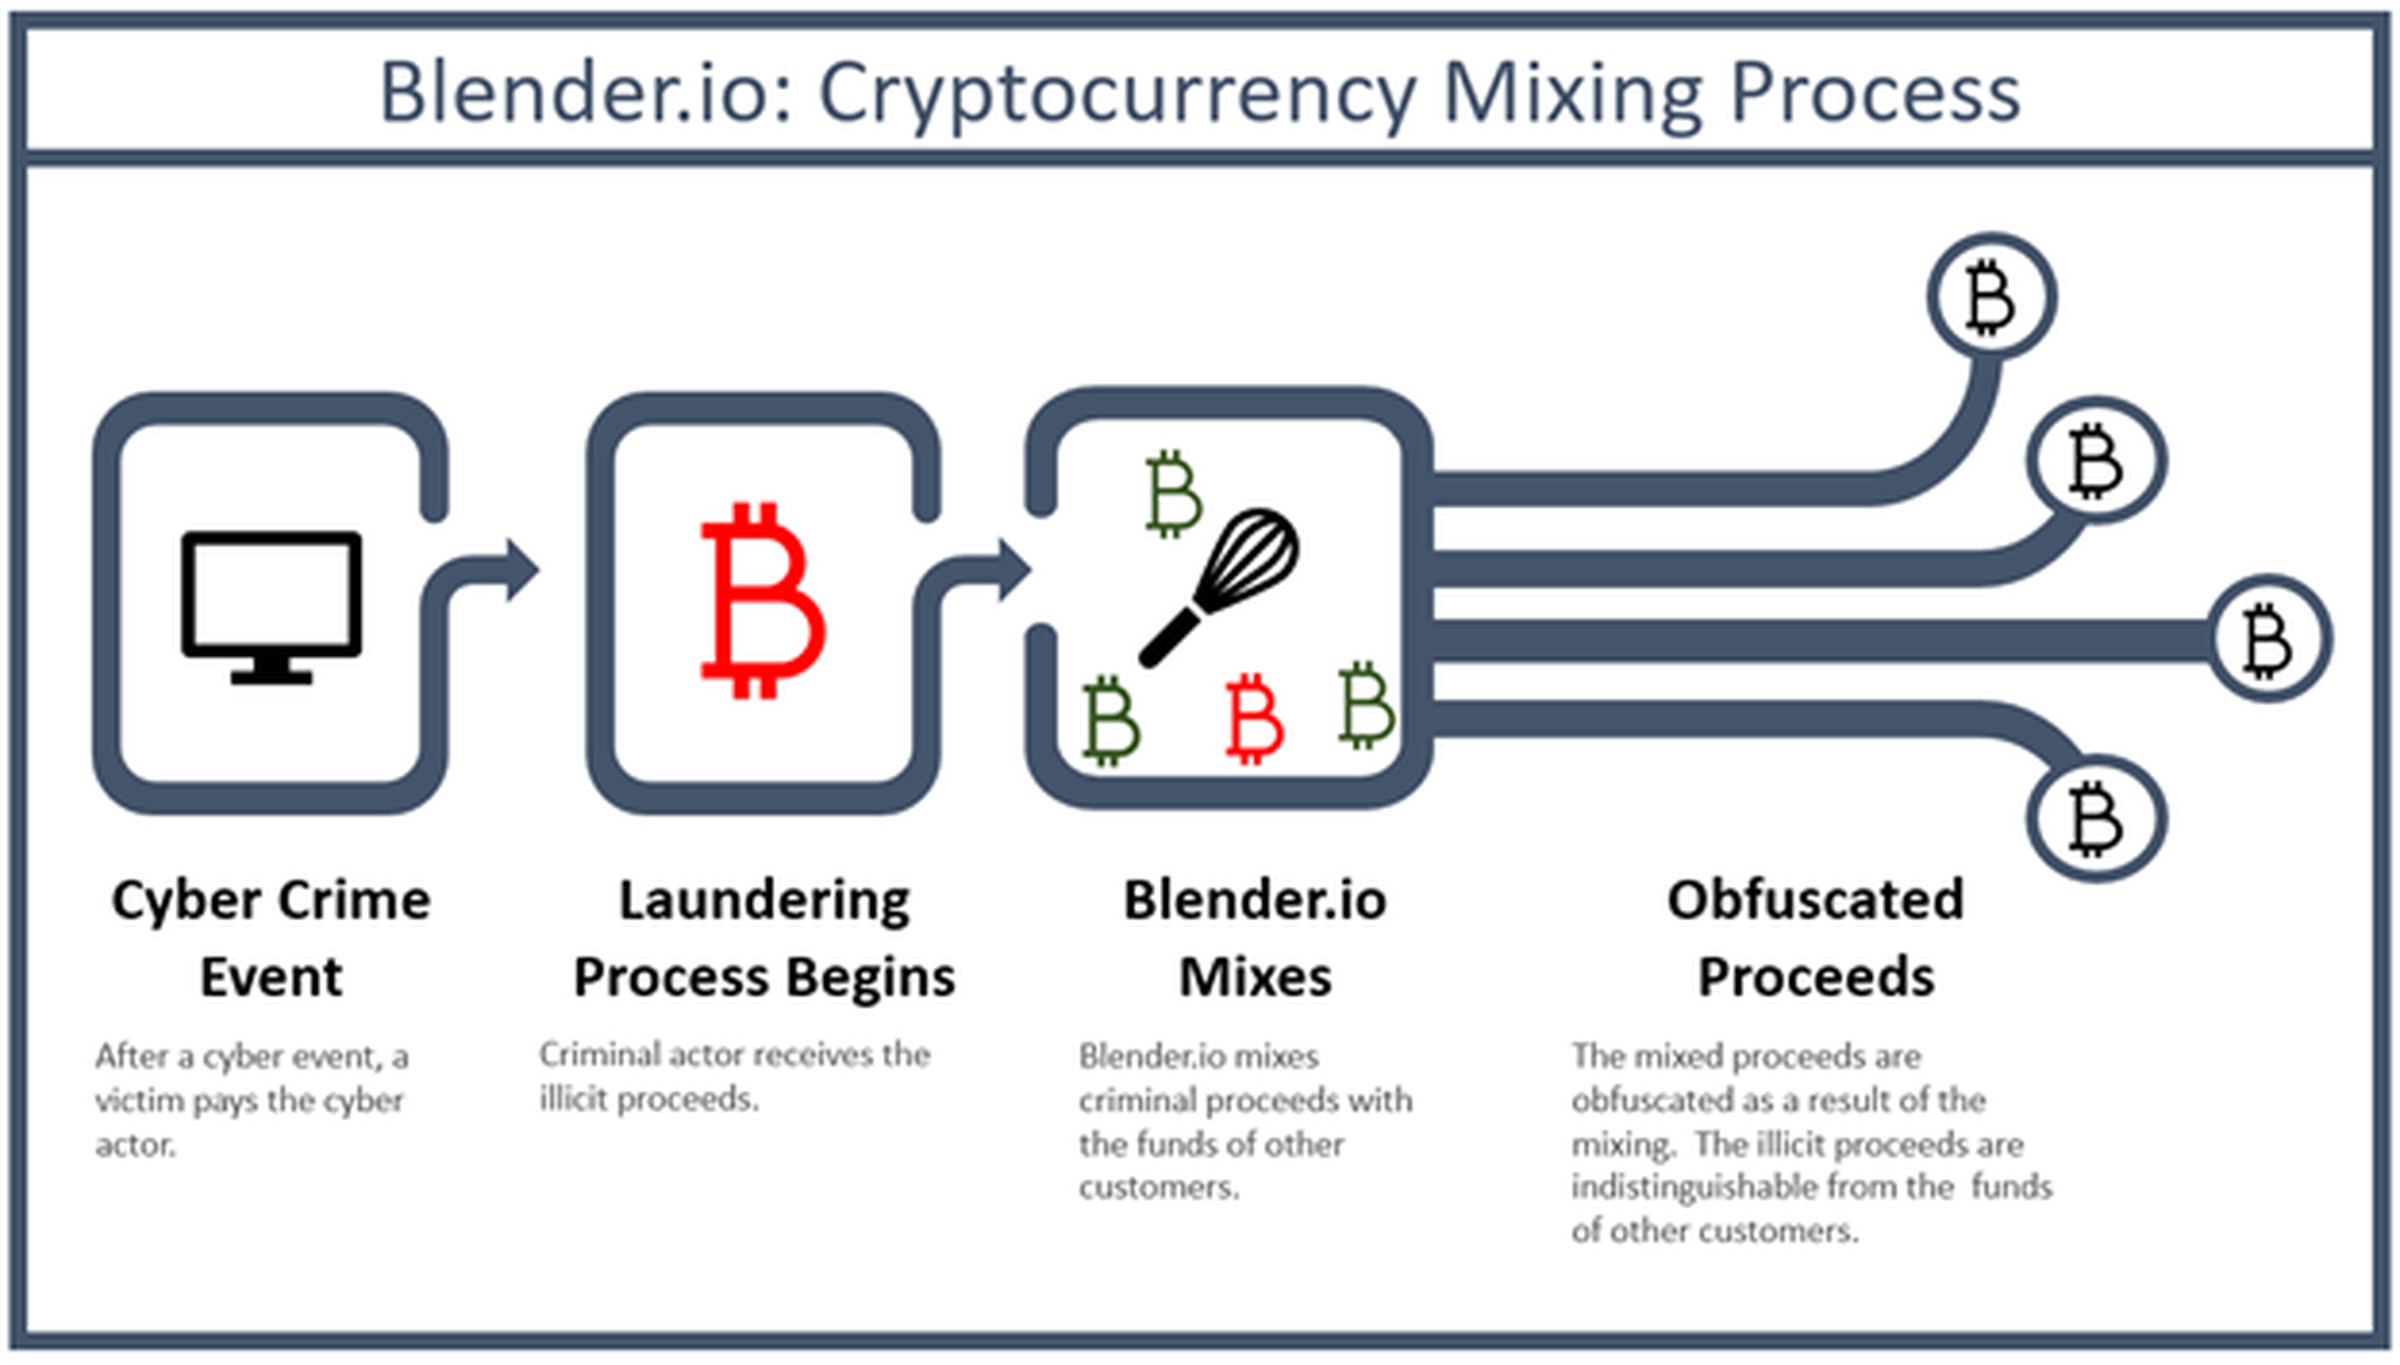 The Treasury’s description of how Blender.io works.